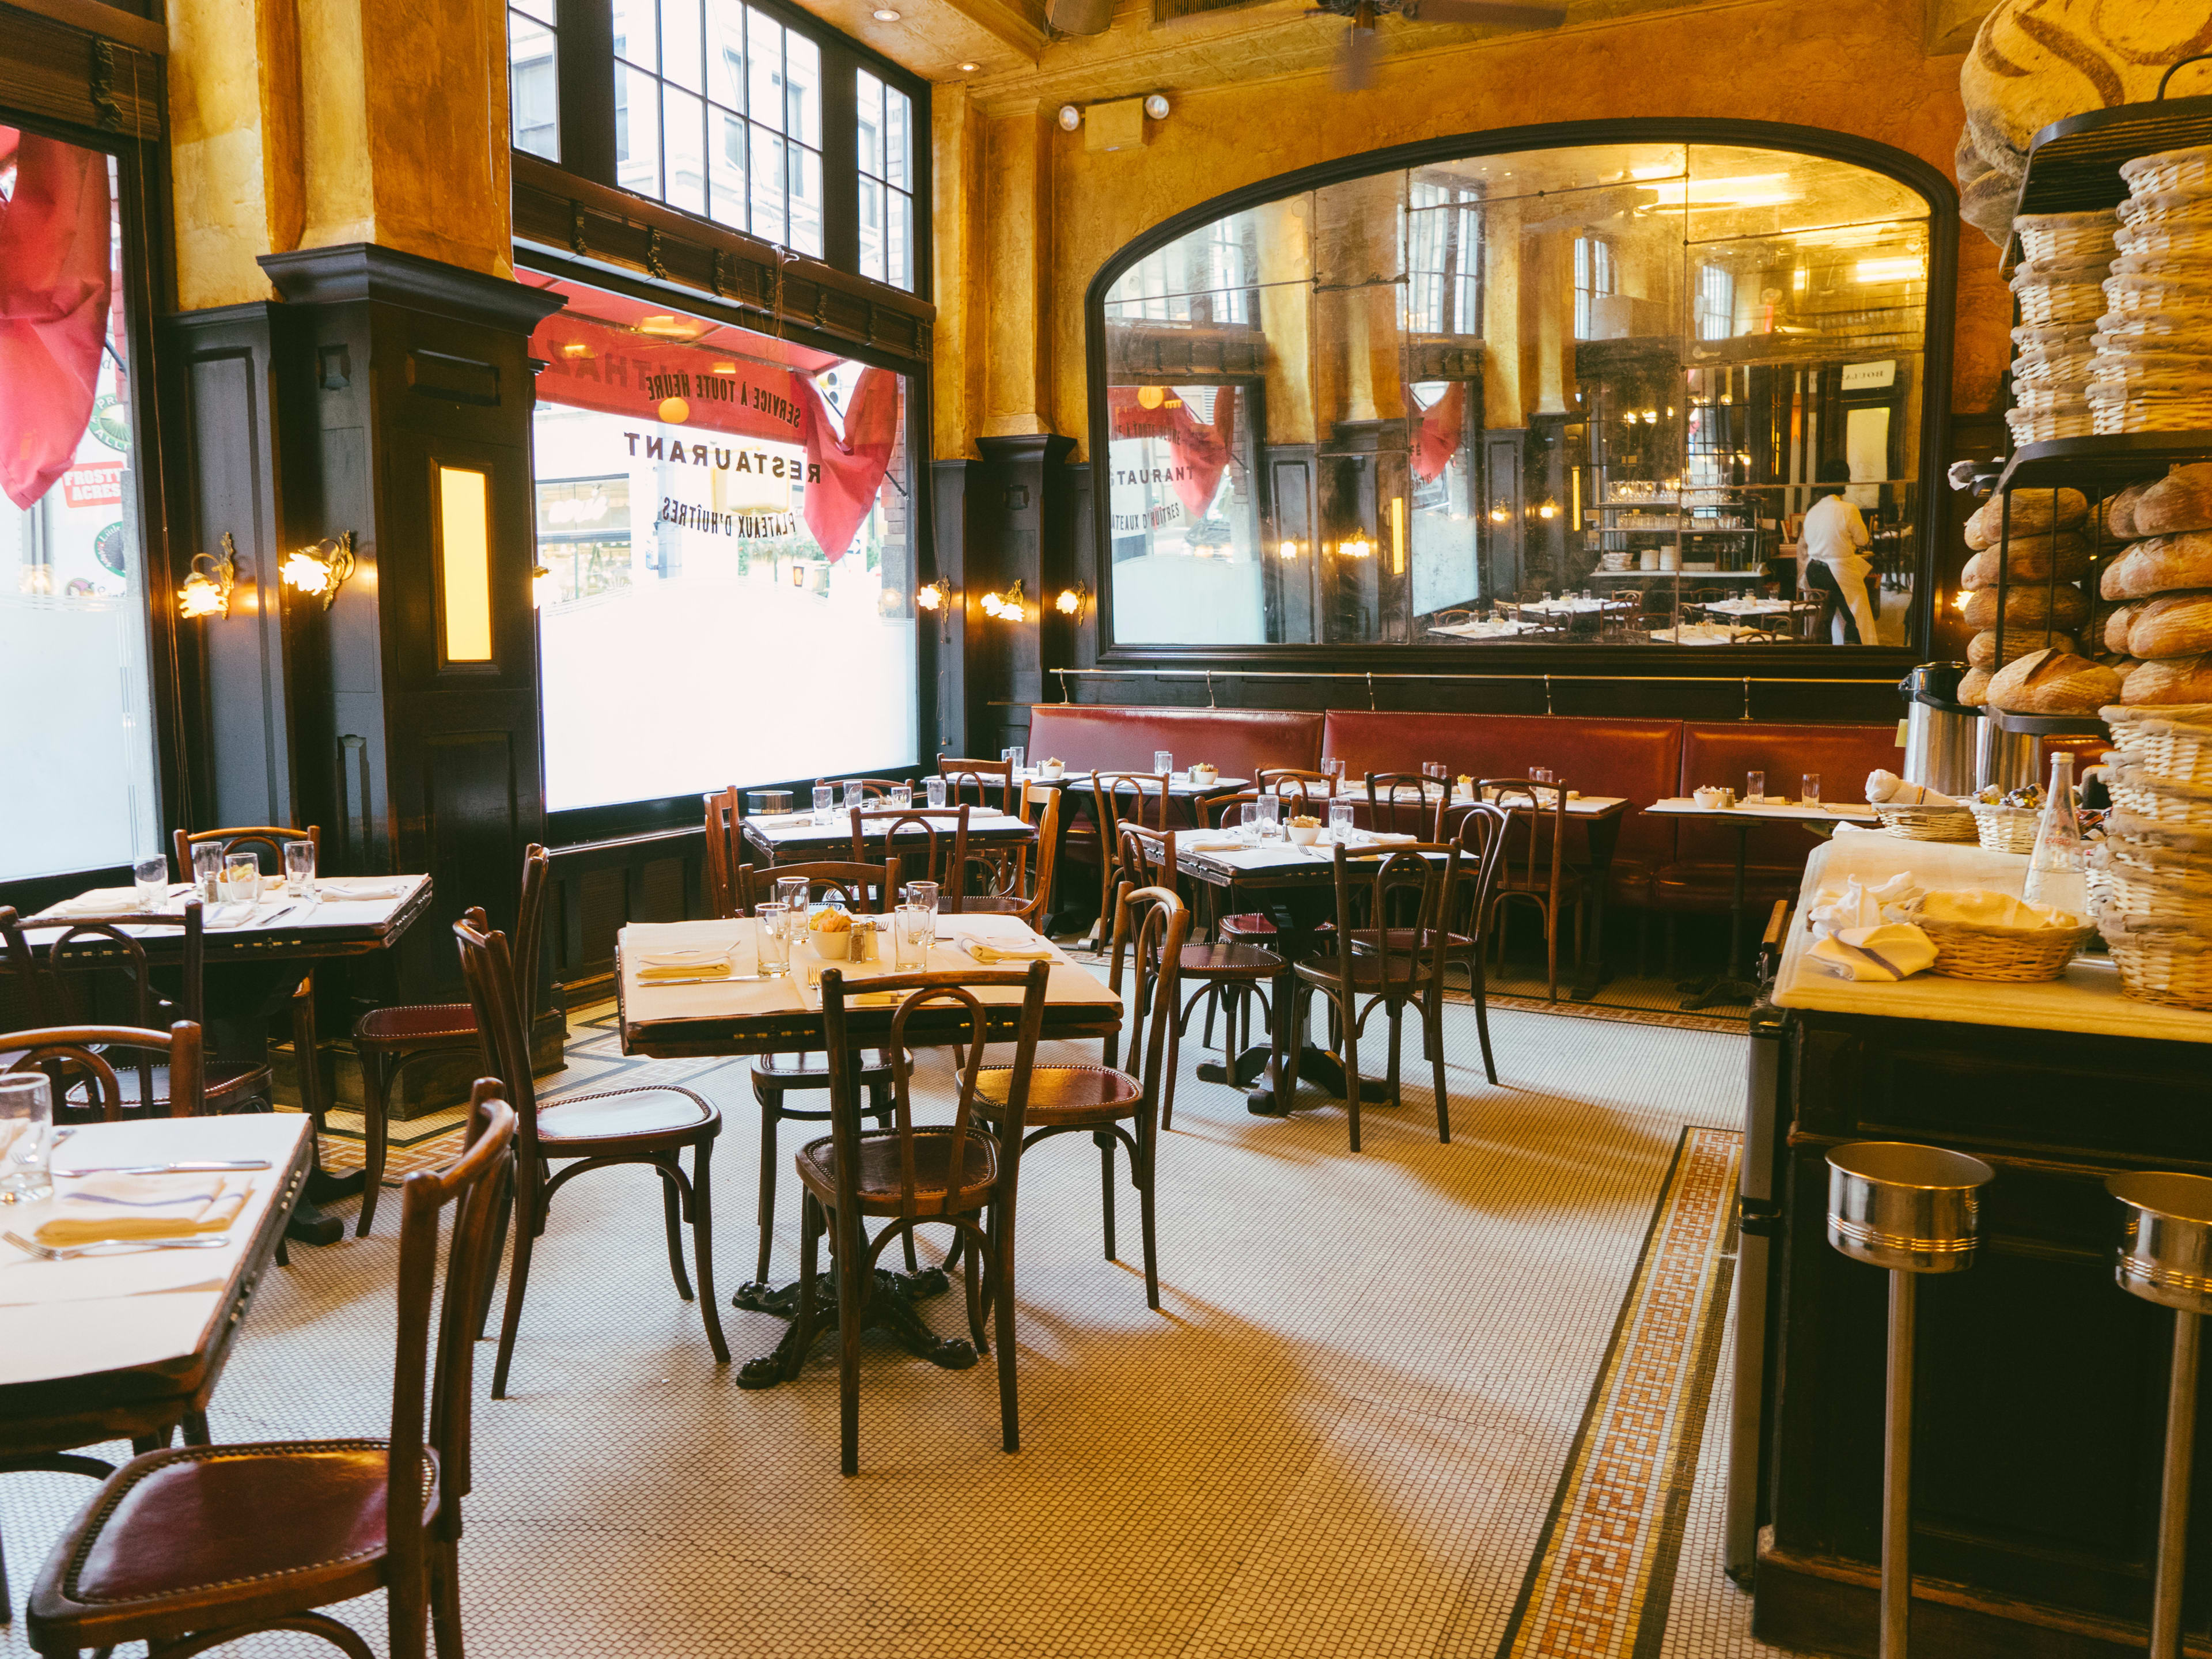 A big, classic French brasserie with burgundy banquettes and mirrors on the walls.